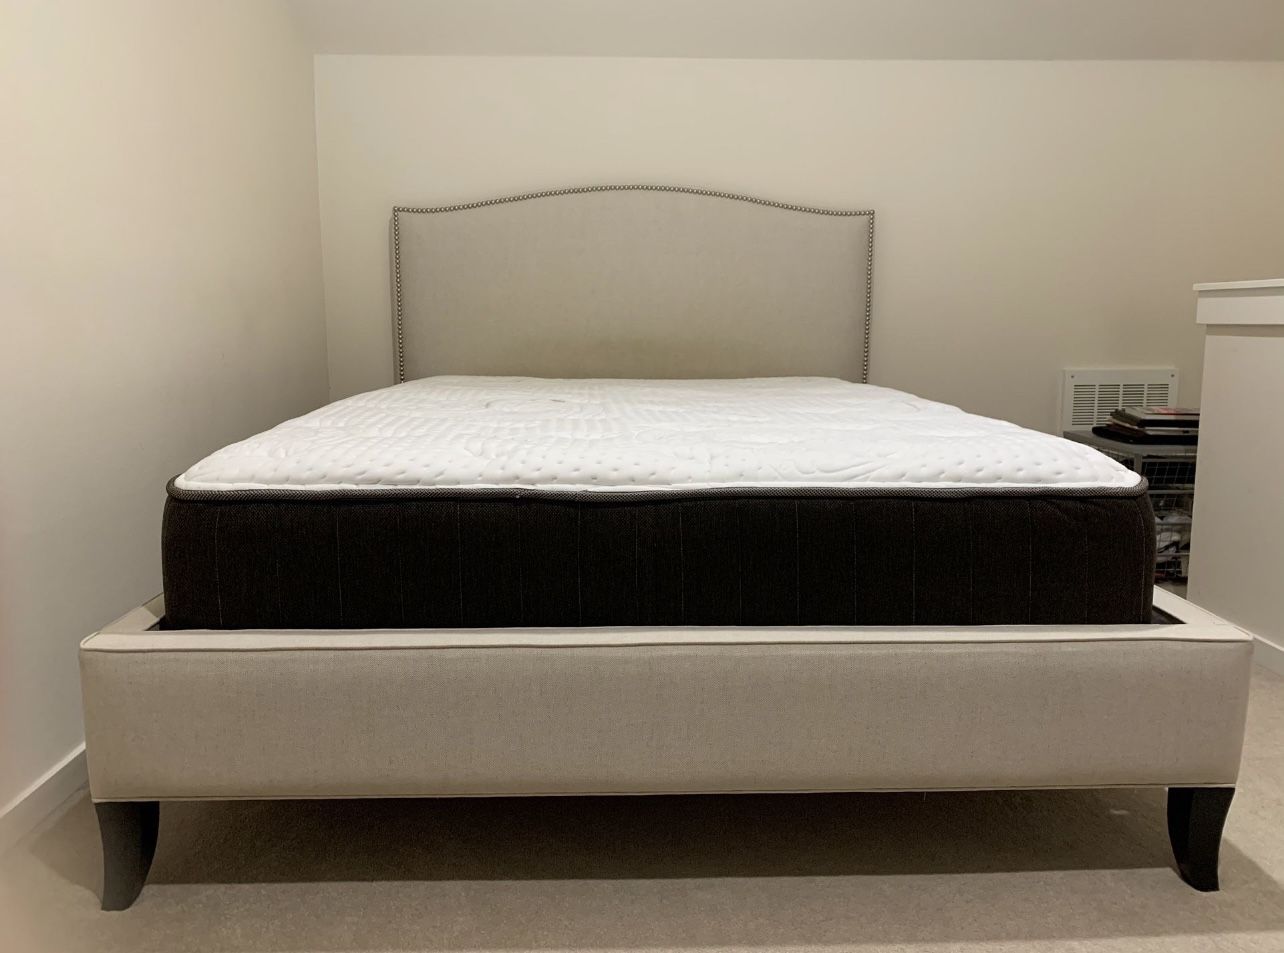 Crate&Barrel Bed Frame with Headboard (no mattress)